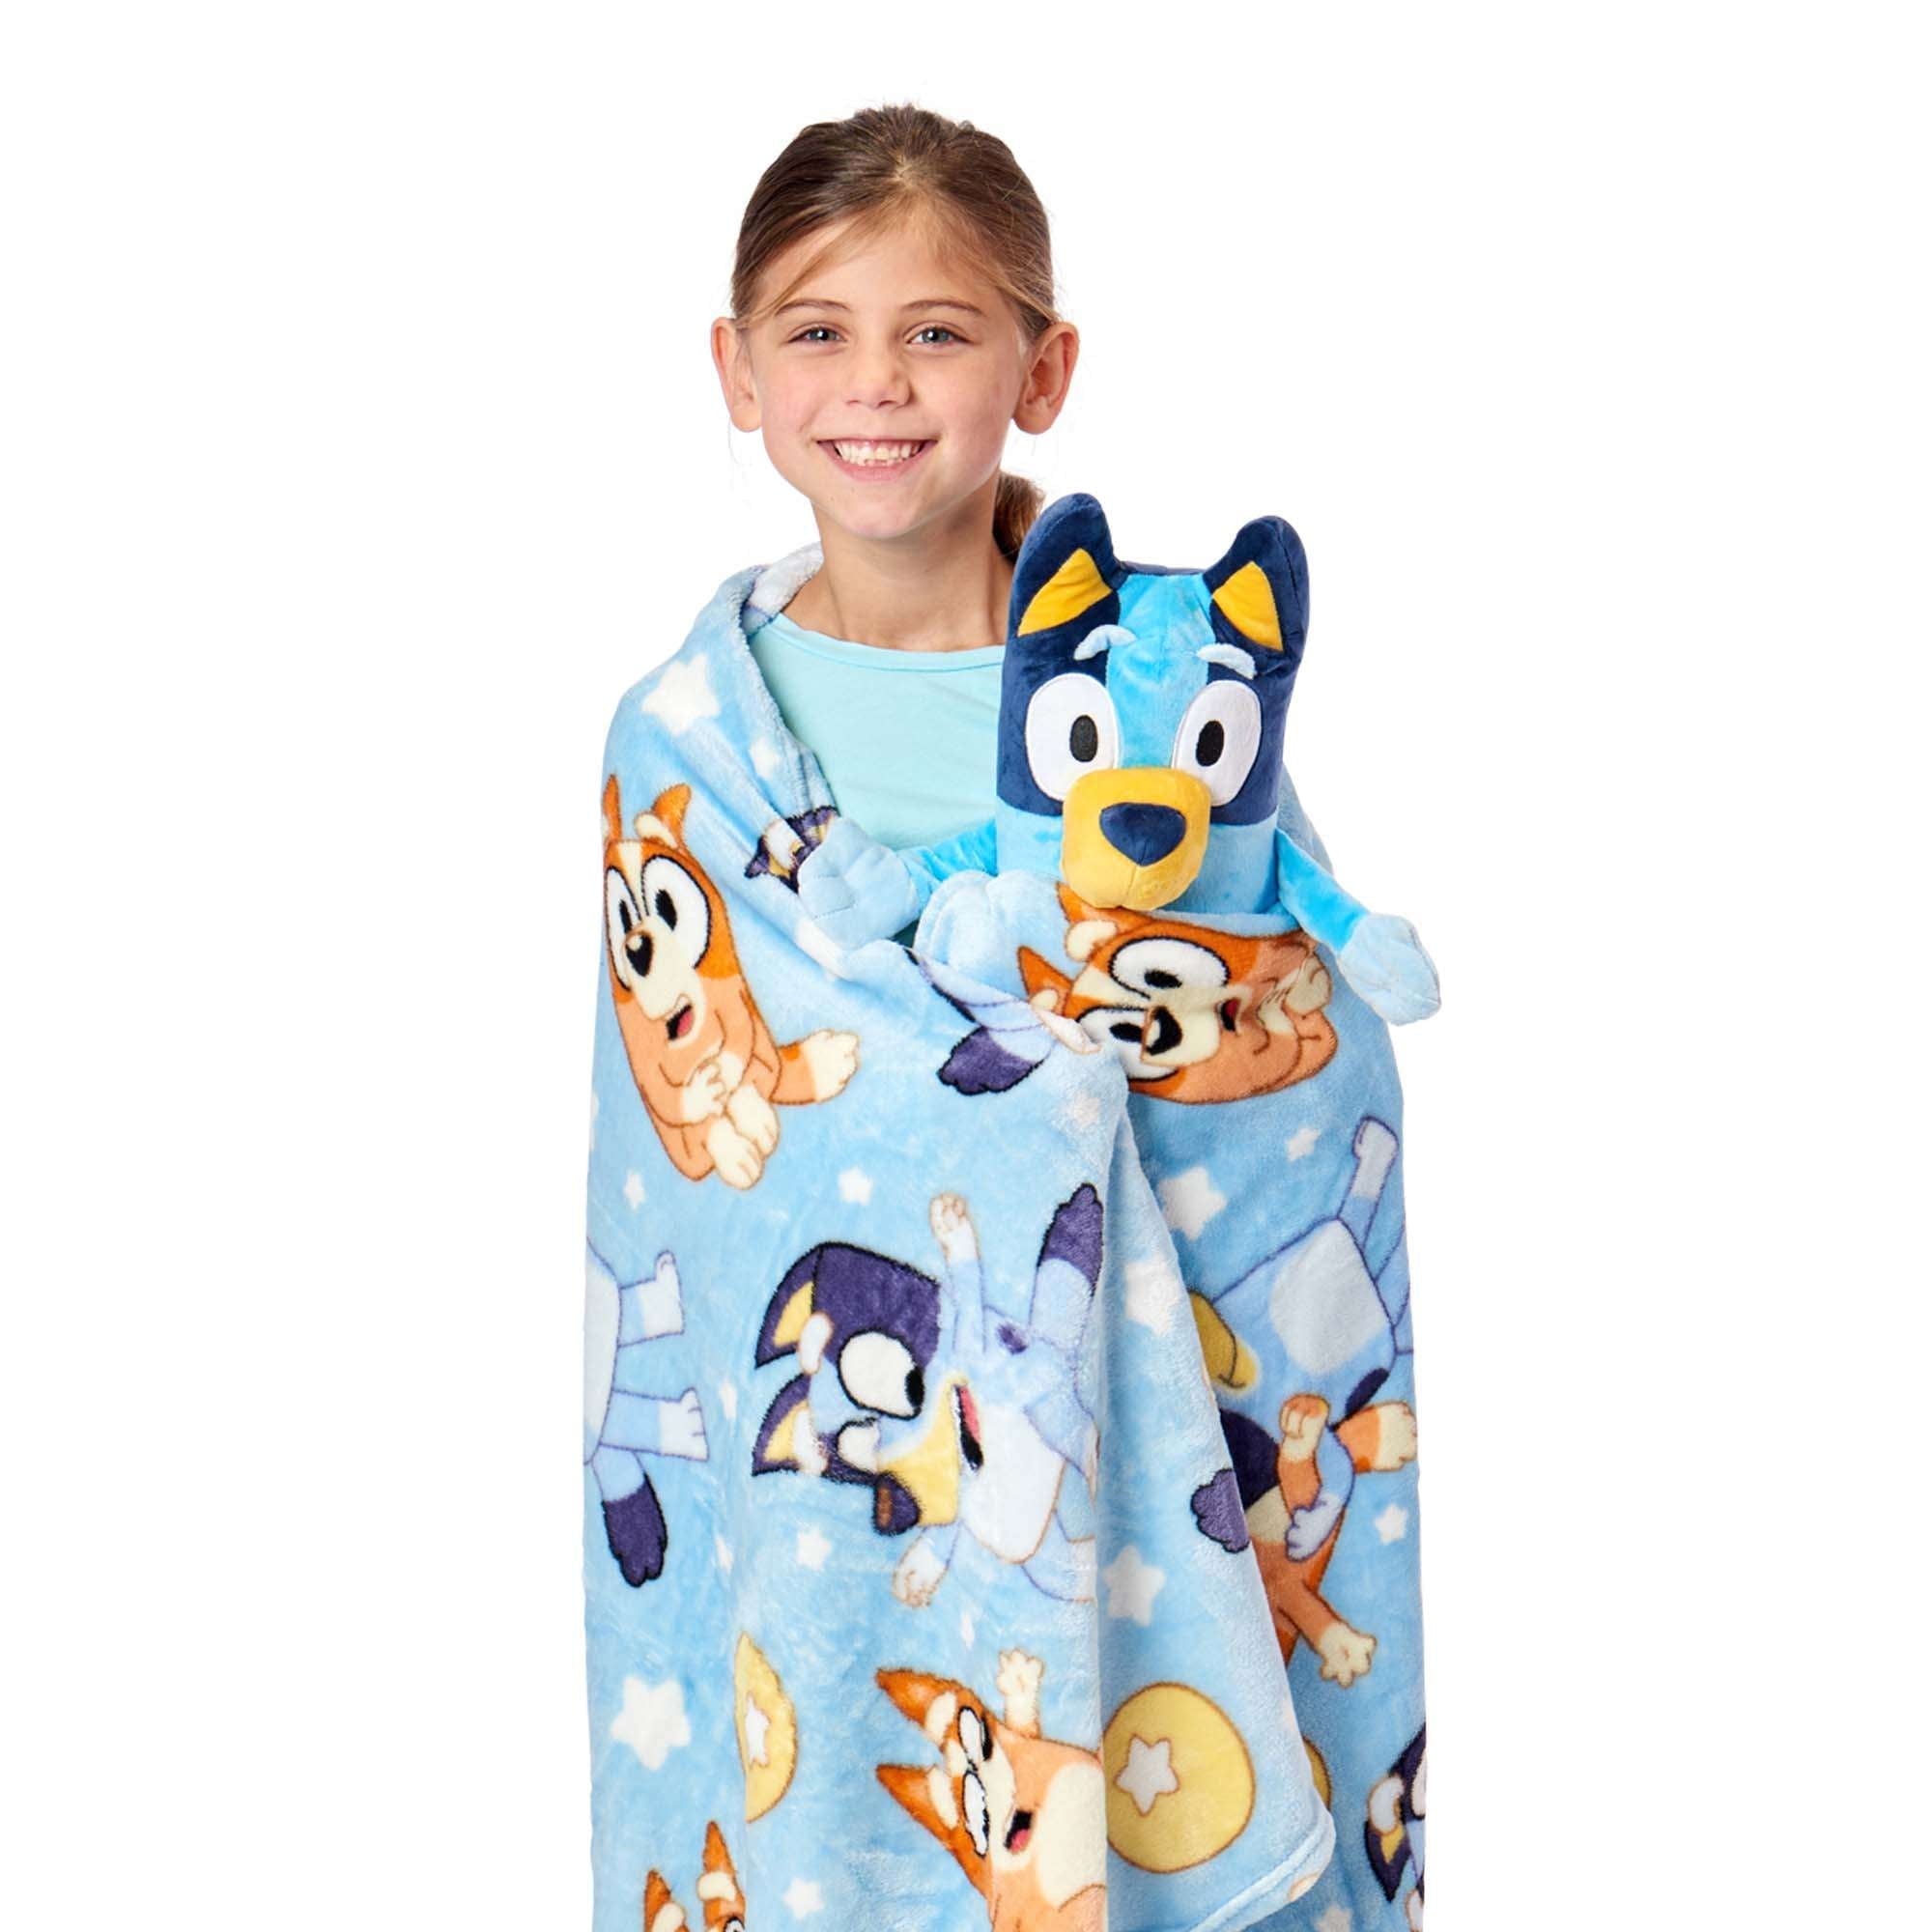 Bluey Kids Hugger with Silk Touch Throw Blanket, 50×60 inches Blue